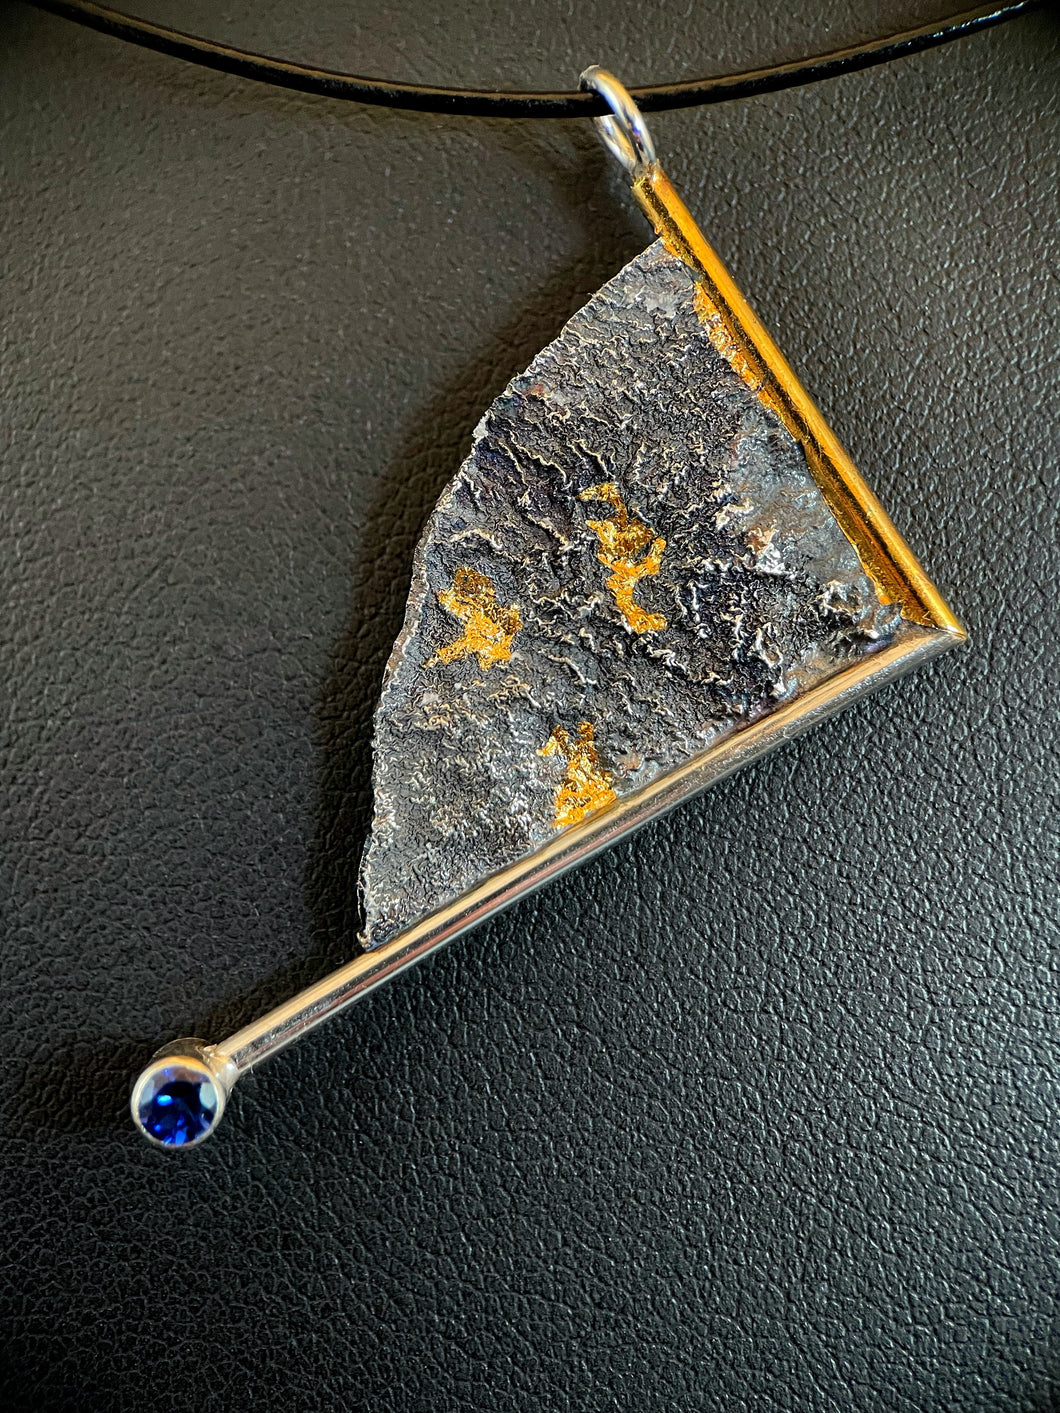 A triangular silver necklace, hanging at an angle. The silver has a terrain-like texture. It is bordered on two sides with wire - gold on the upper right, silver on the lower side. The silver wire terminates in a lab-grown sapphire. The third side is a raw, curving edge. There are three pockets of gold nestled in the deep recesses of the silver.